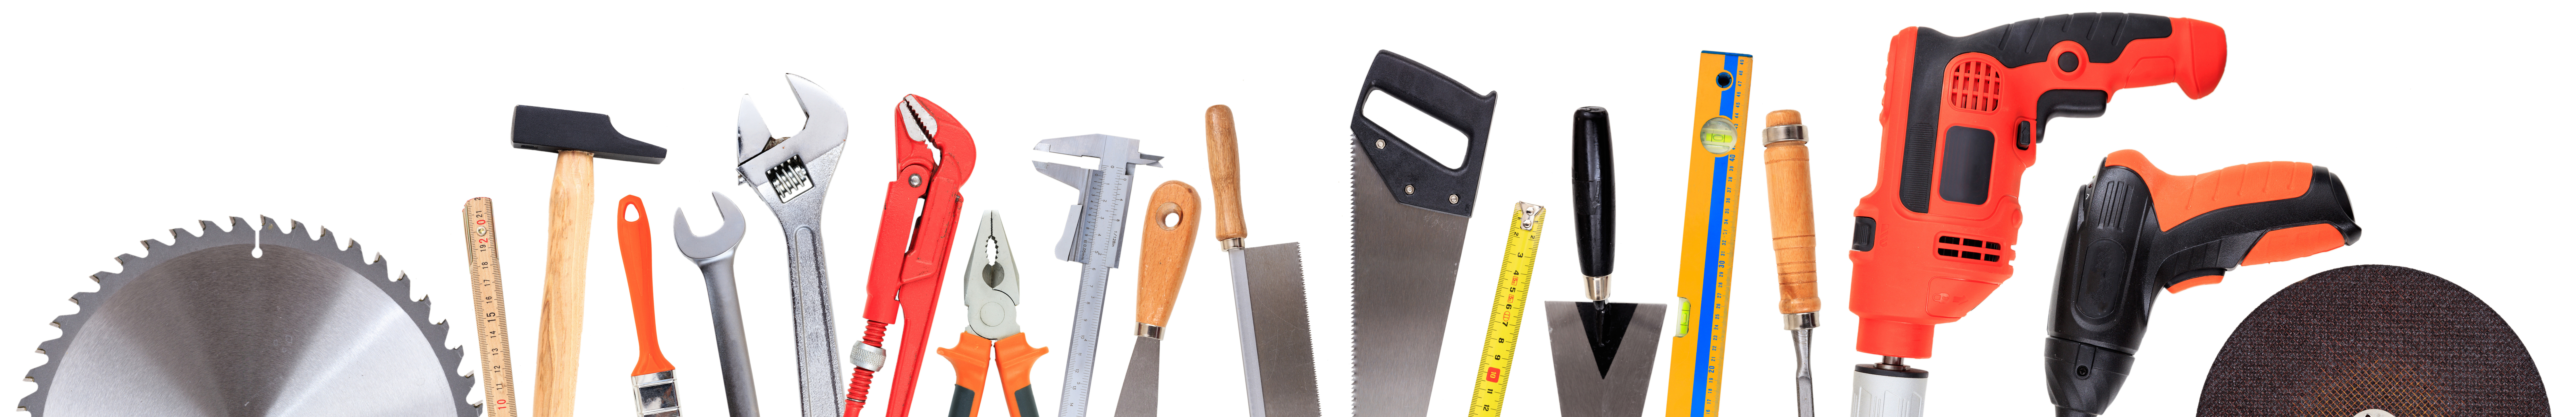 Buffalo Home handyman service tools to repair and renovate and installation.